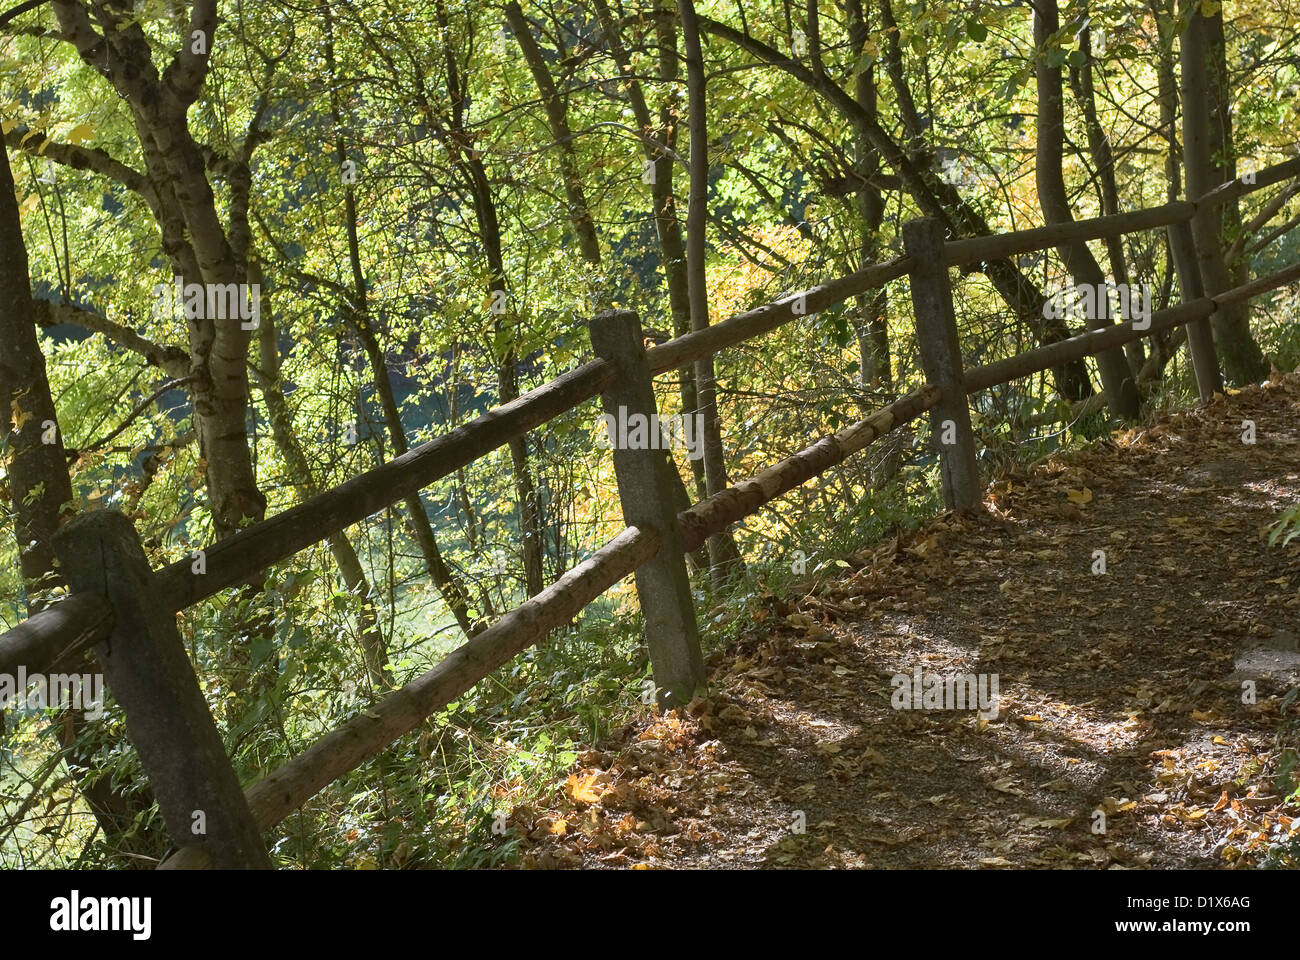 Shady Trail with Wooden Fence in Autumn Stock Photo